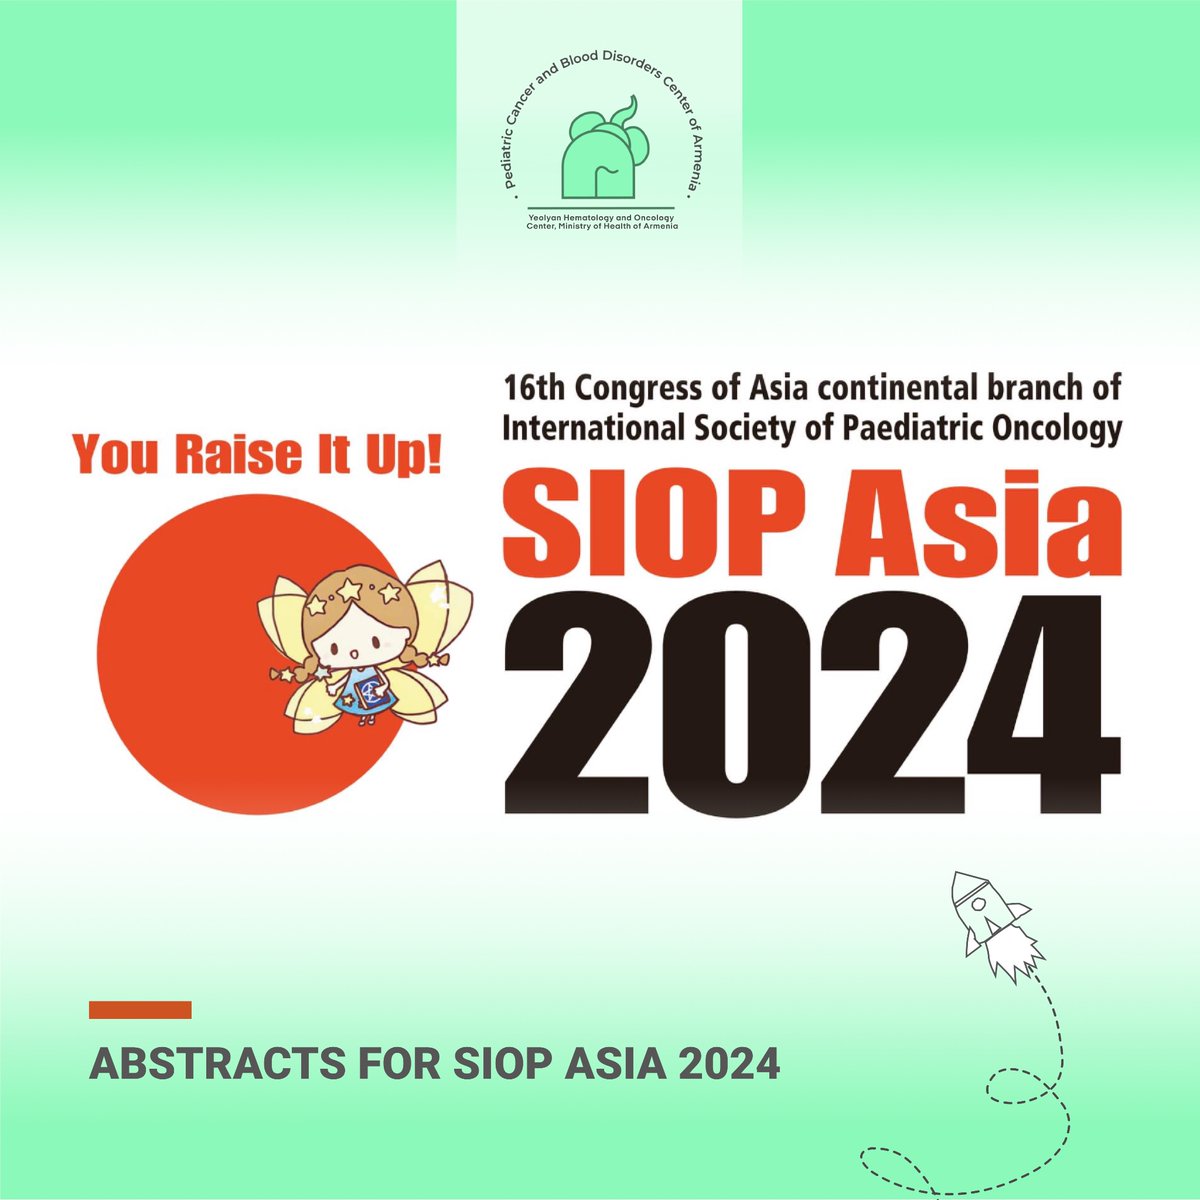 The 16th congress of the International SIOP Asia 2024, will be held in Japan, on June 22-25. Prof. Gevorg Tamamyan, Head of the Center, and Ruzanna Papyan, a pediatric oncologist, are members of the International Organizing Committee (IOC) of SIOP Asia 2024.